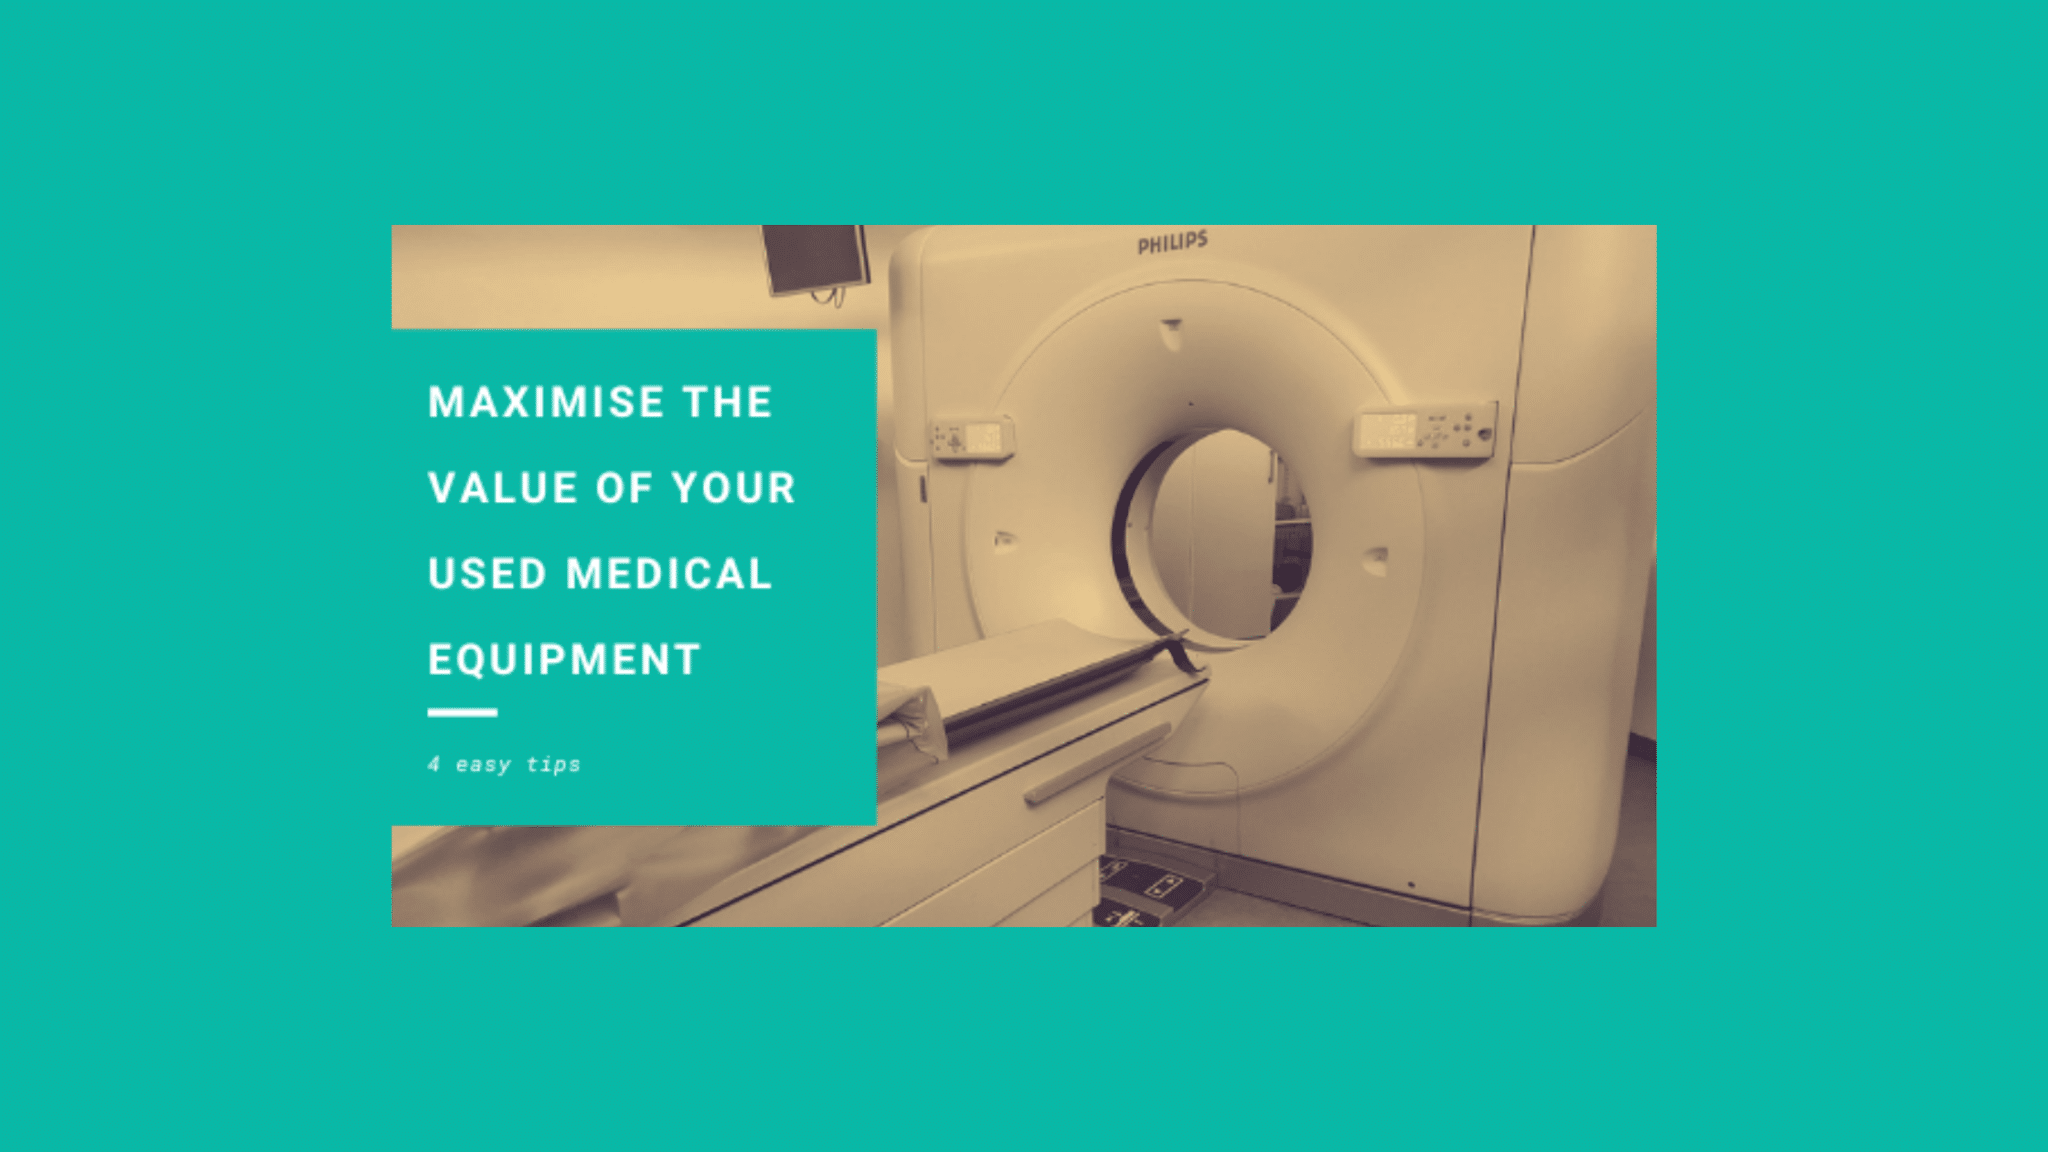 How-to-maximise-the-value-of-your-used-medical-equipment